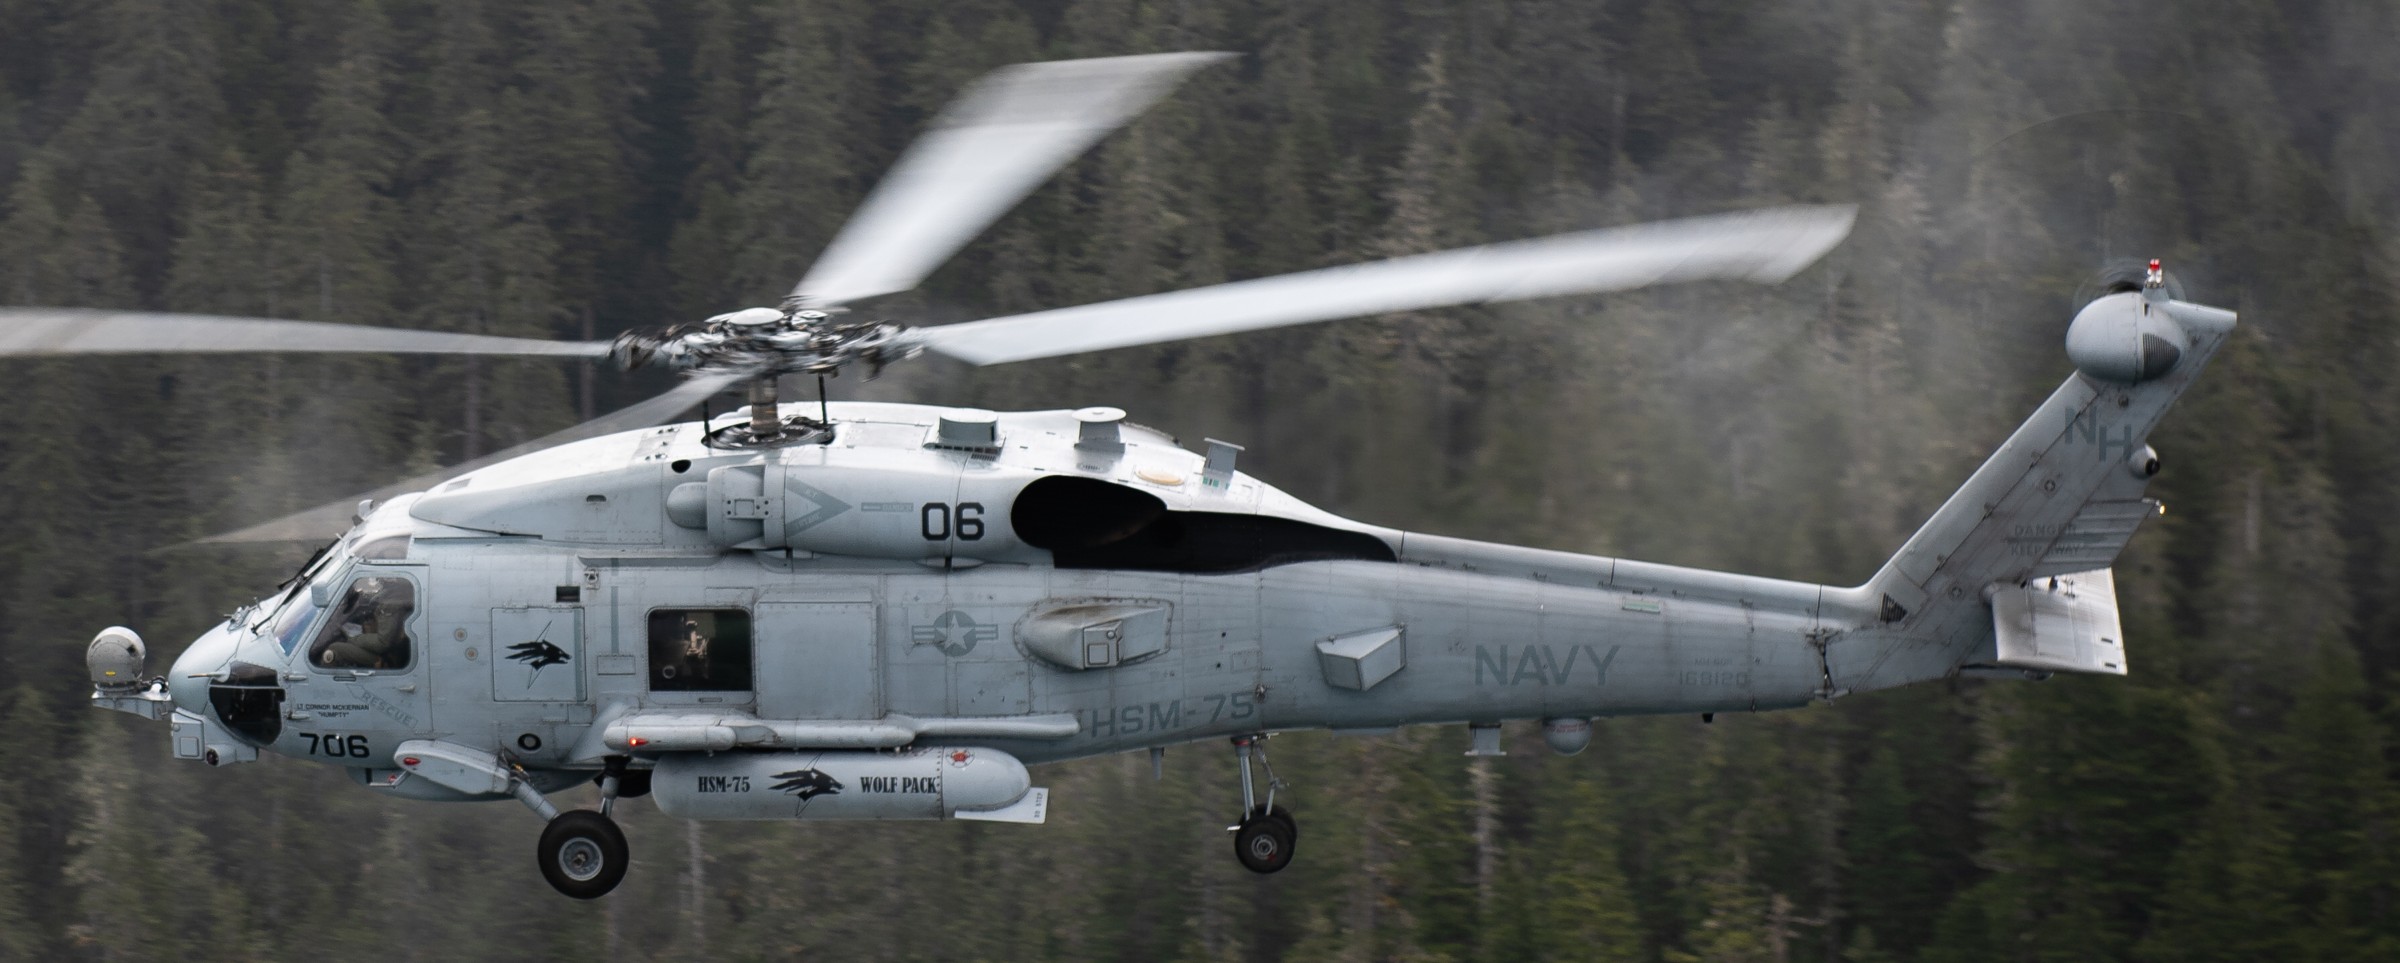 hsm-75 wolfpack helicopter maritime strike squadron us navy mh-60r seahawk 2013 28